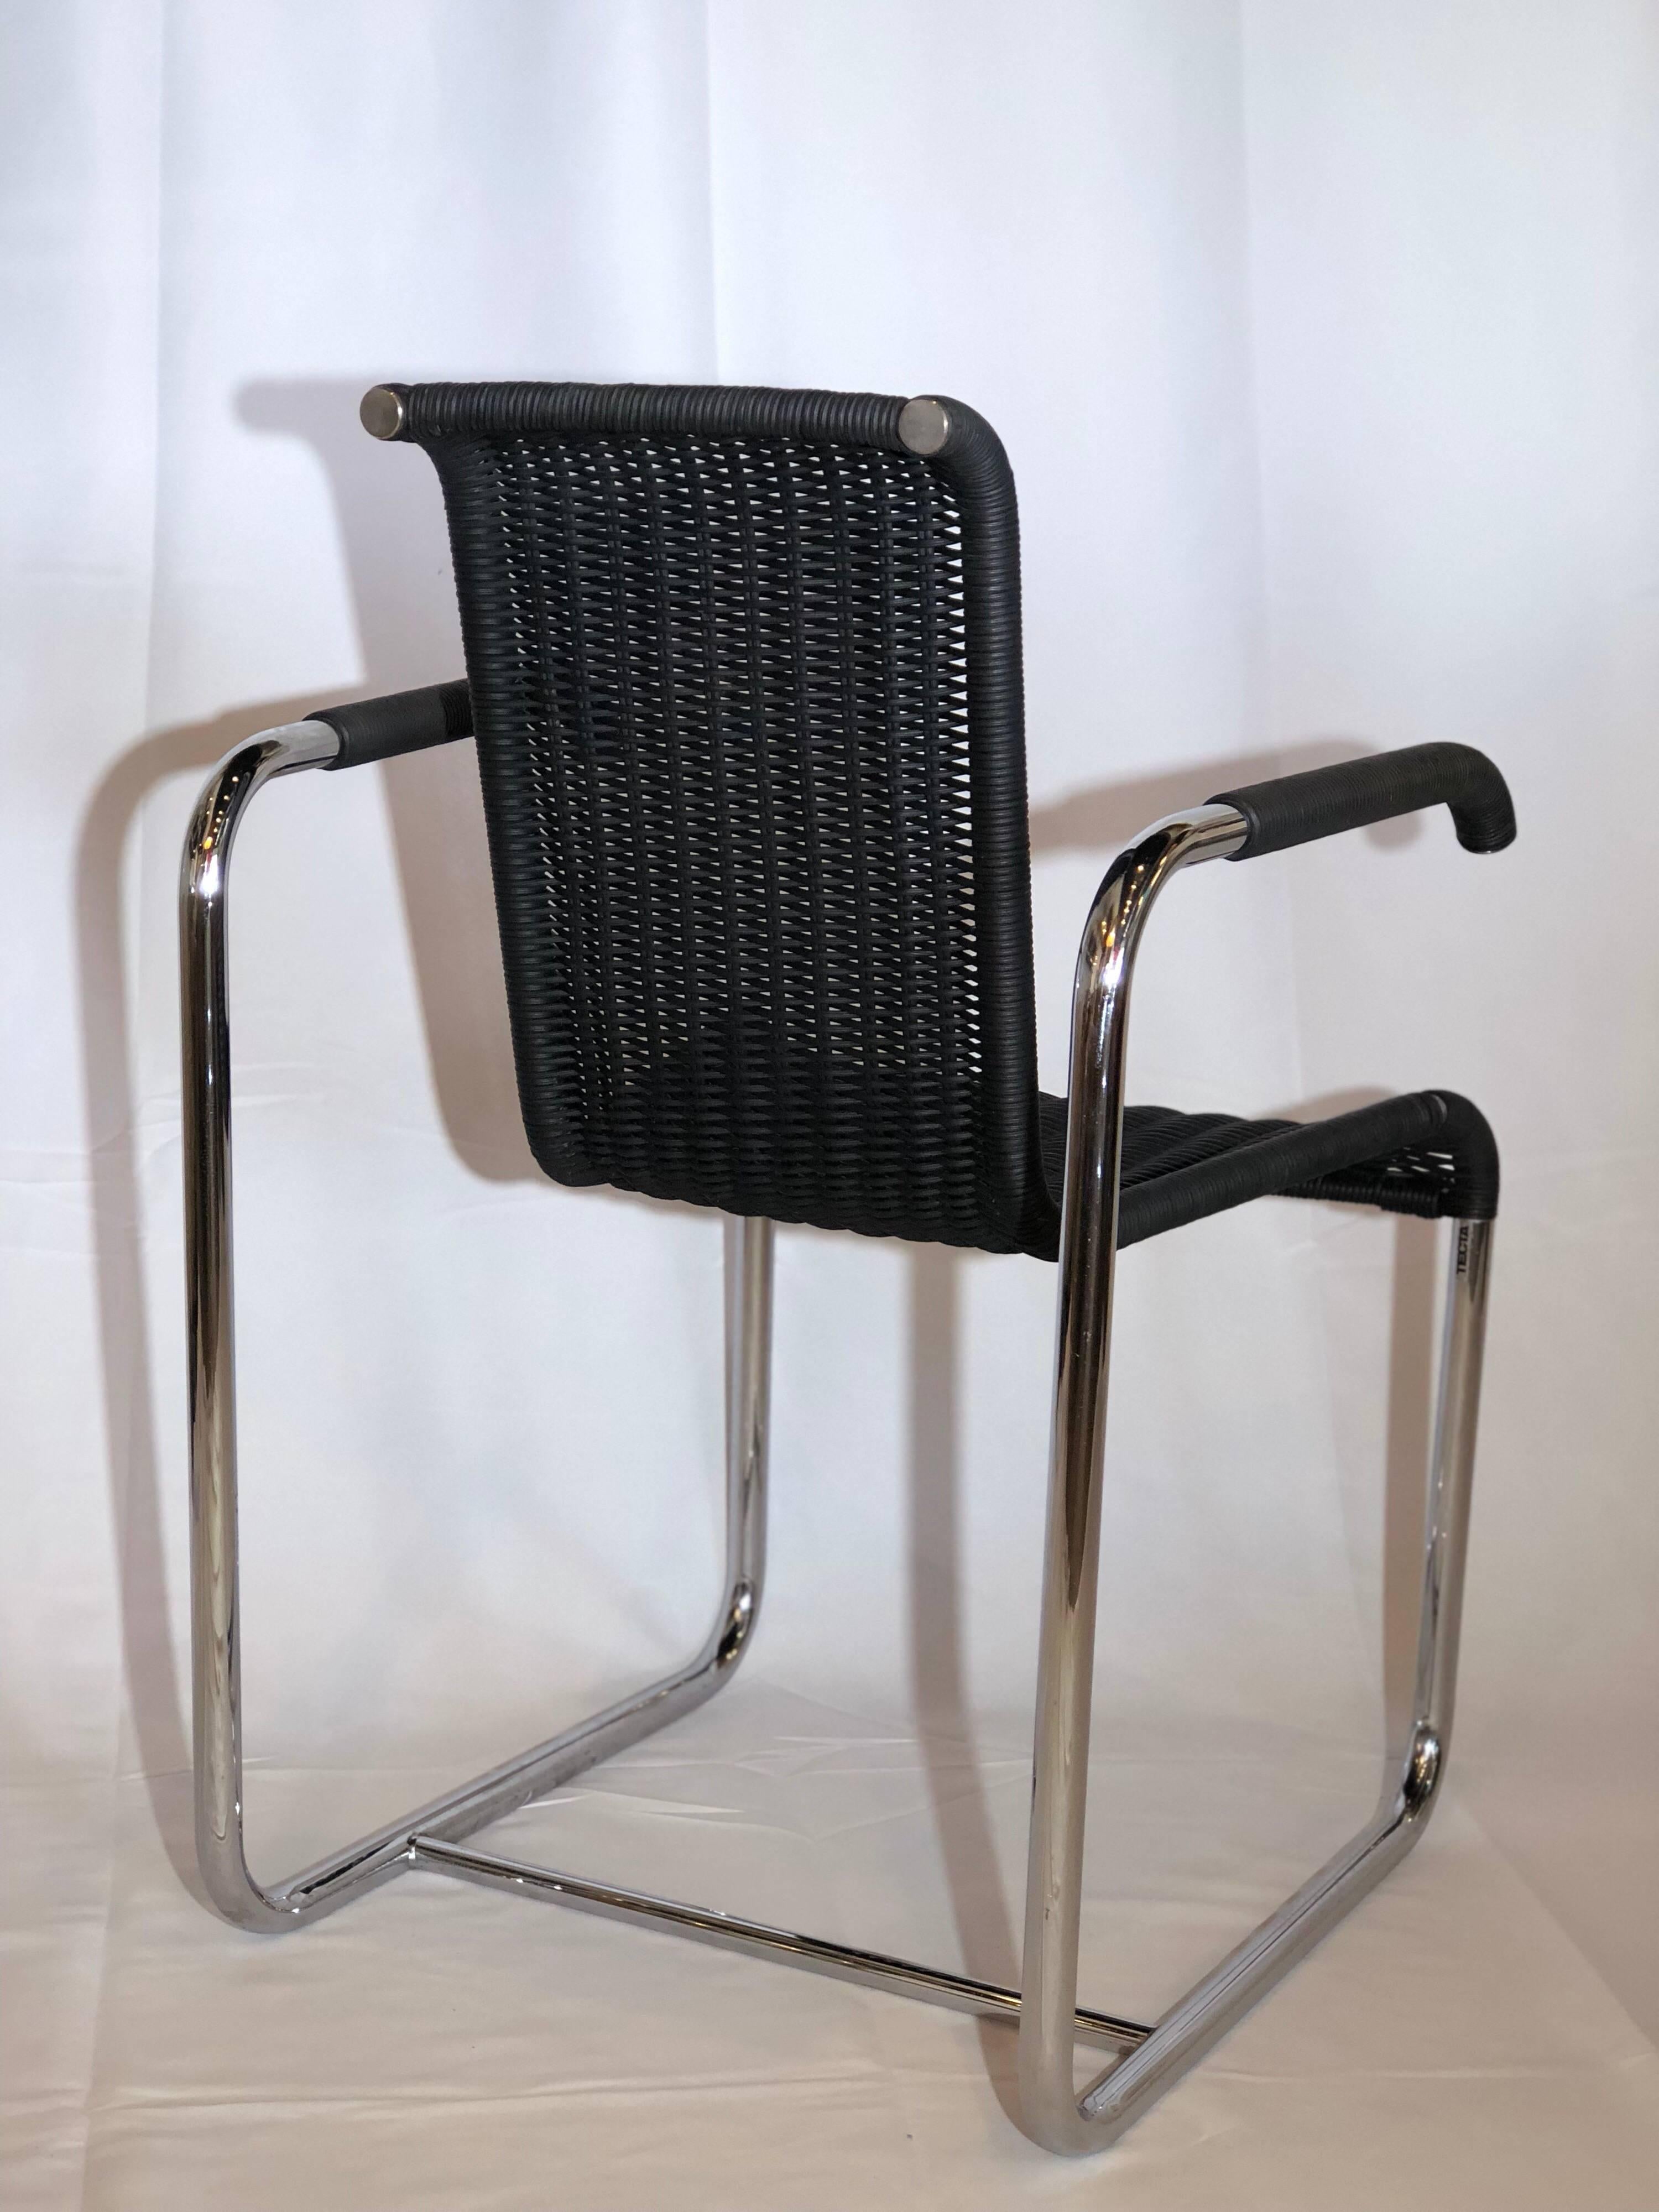 Jean Prouvé D20 Stainless Steel Leather Wicker Chairs for Tecta, Germany, 1980s For Sale 2